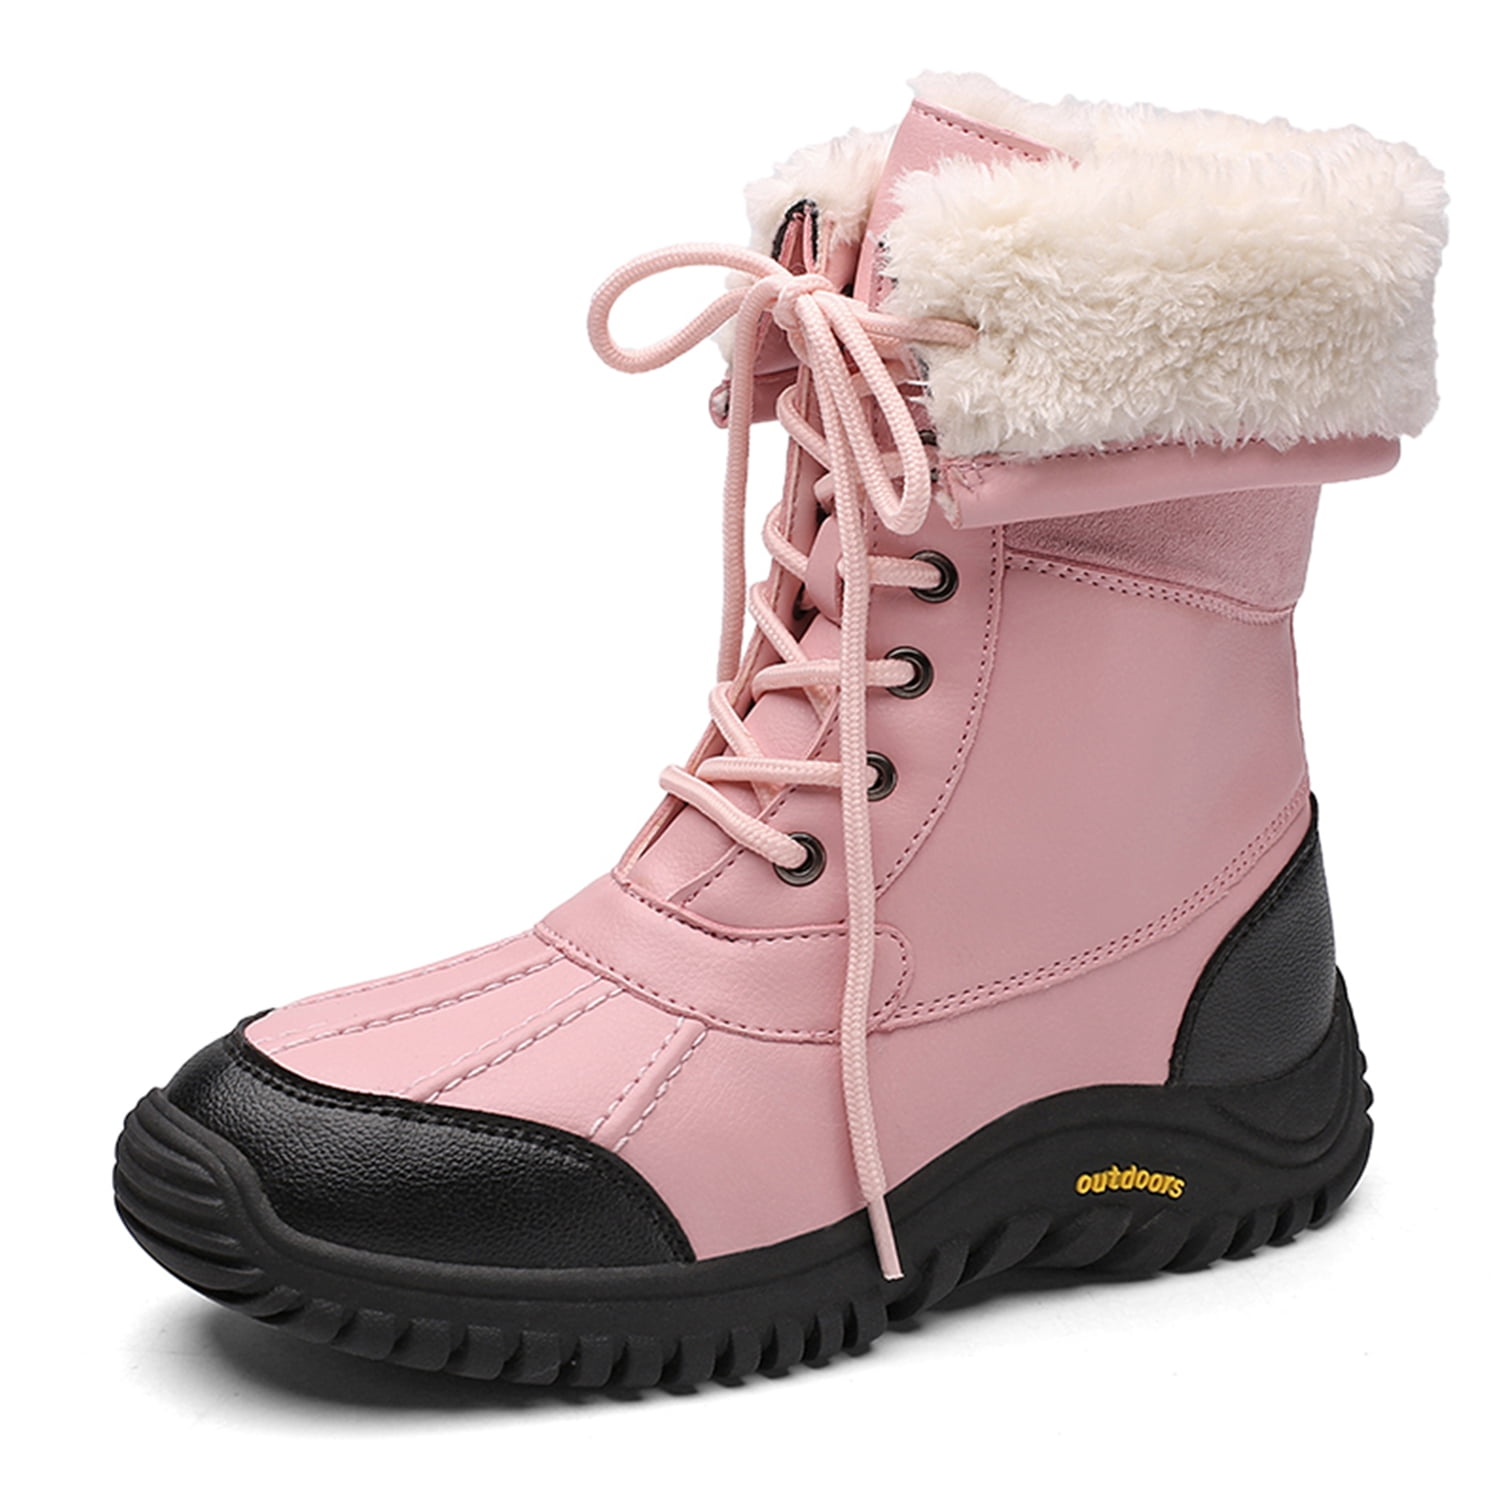 Womens Mid Calf Winter Snow Boots Waterproof Outdoor Cold Weather Insulated Boot Fur Lined Non Slip 